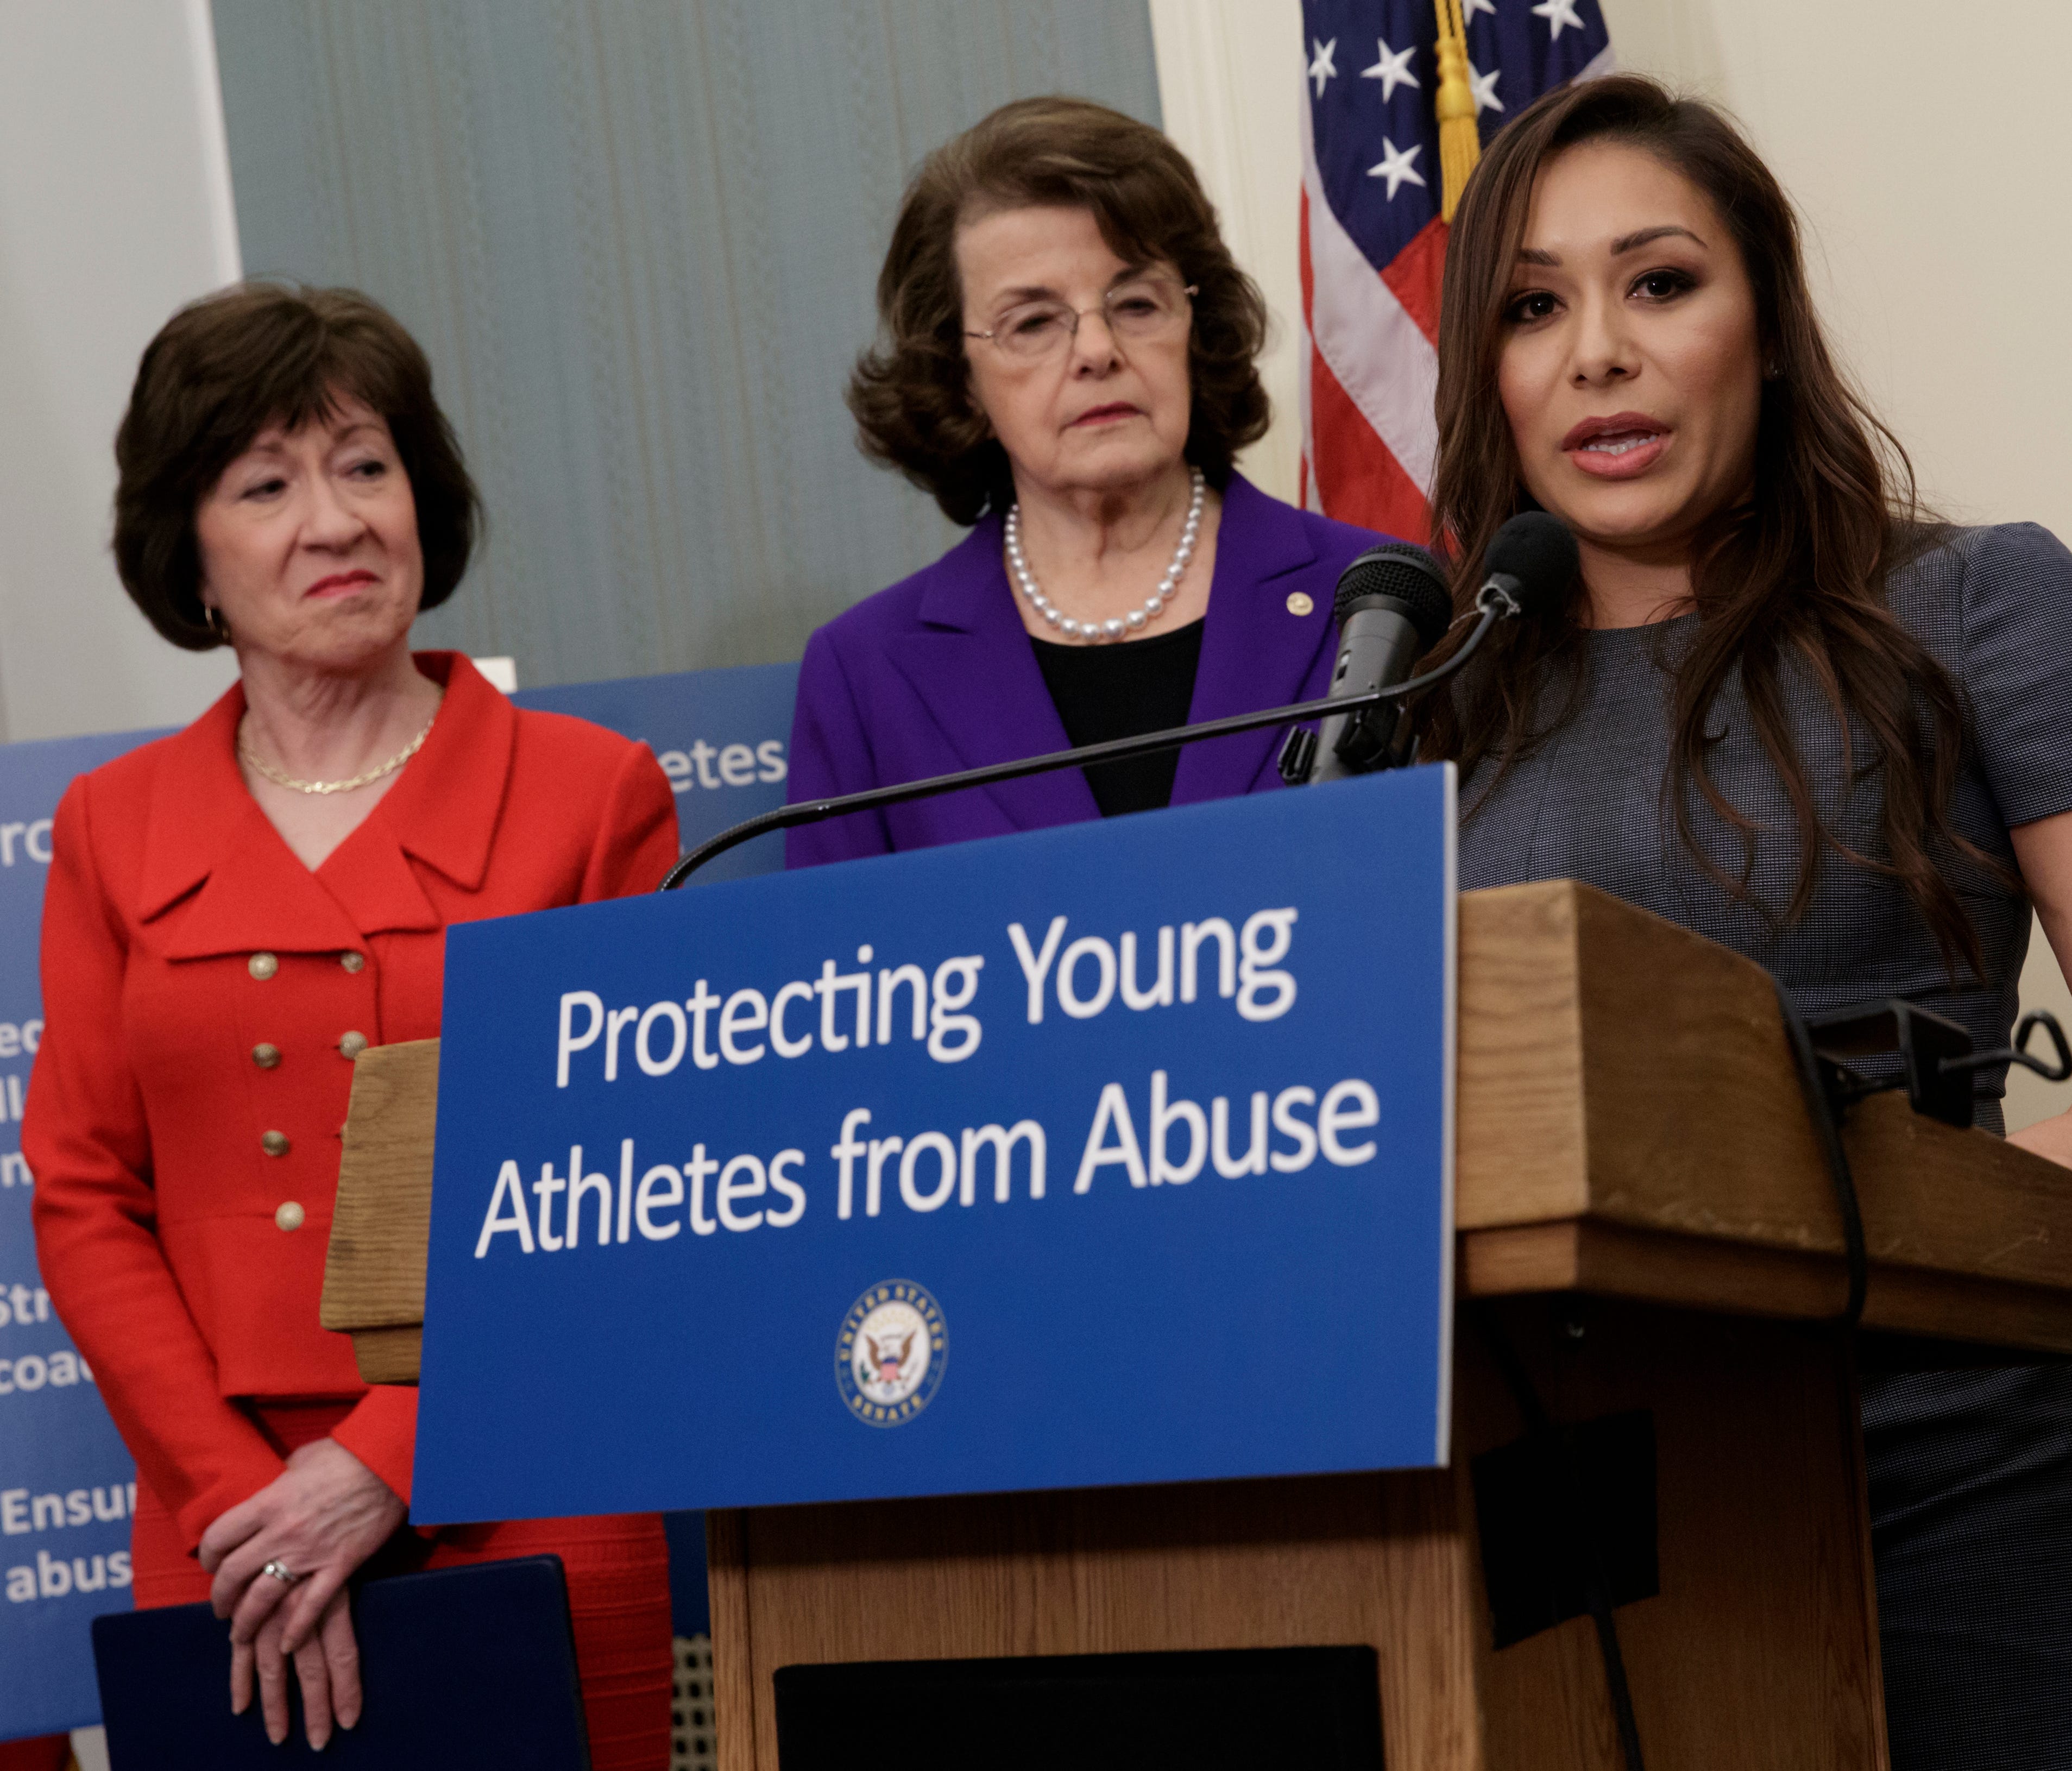 Former gymnast Jeanette Antolin, right, accompanied by Sen. Susan Collins, R-Maine, left, and Sen. Dianne Feinstein, D-Calif., ranking member on the Senate Judiciary Committee, speaks during a news conference on Capitol Hill in Washington on March 28